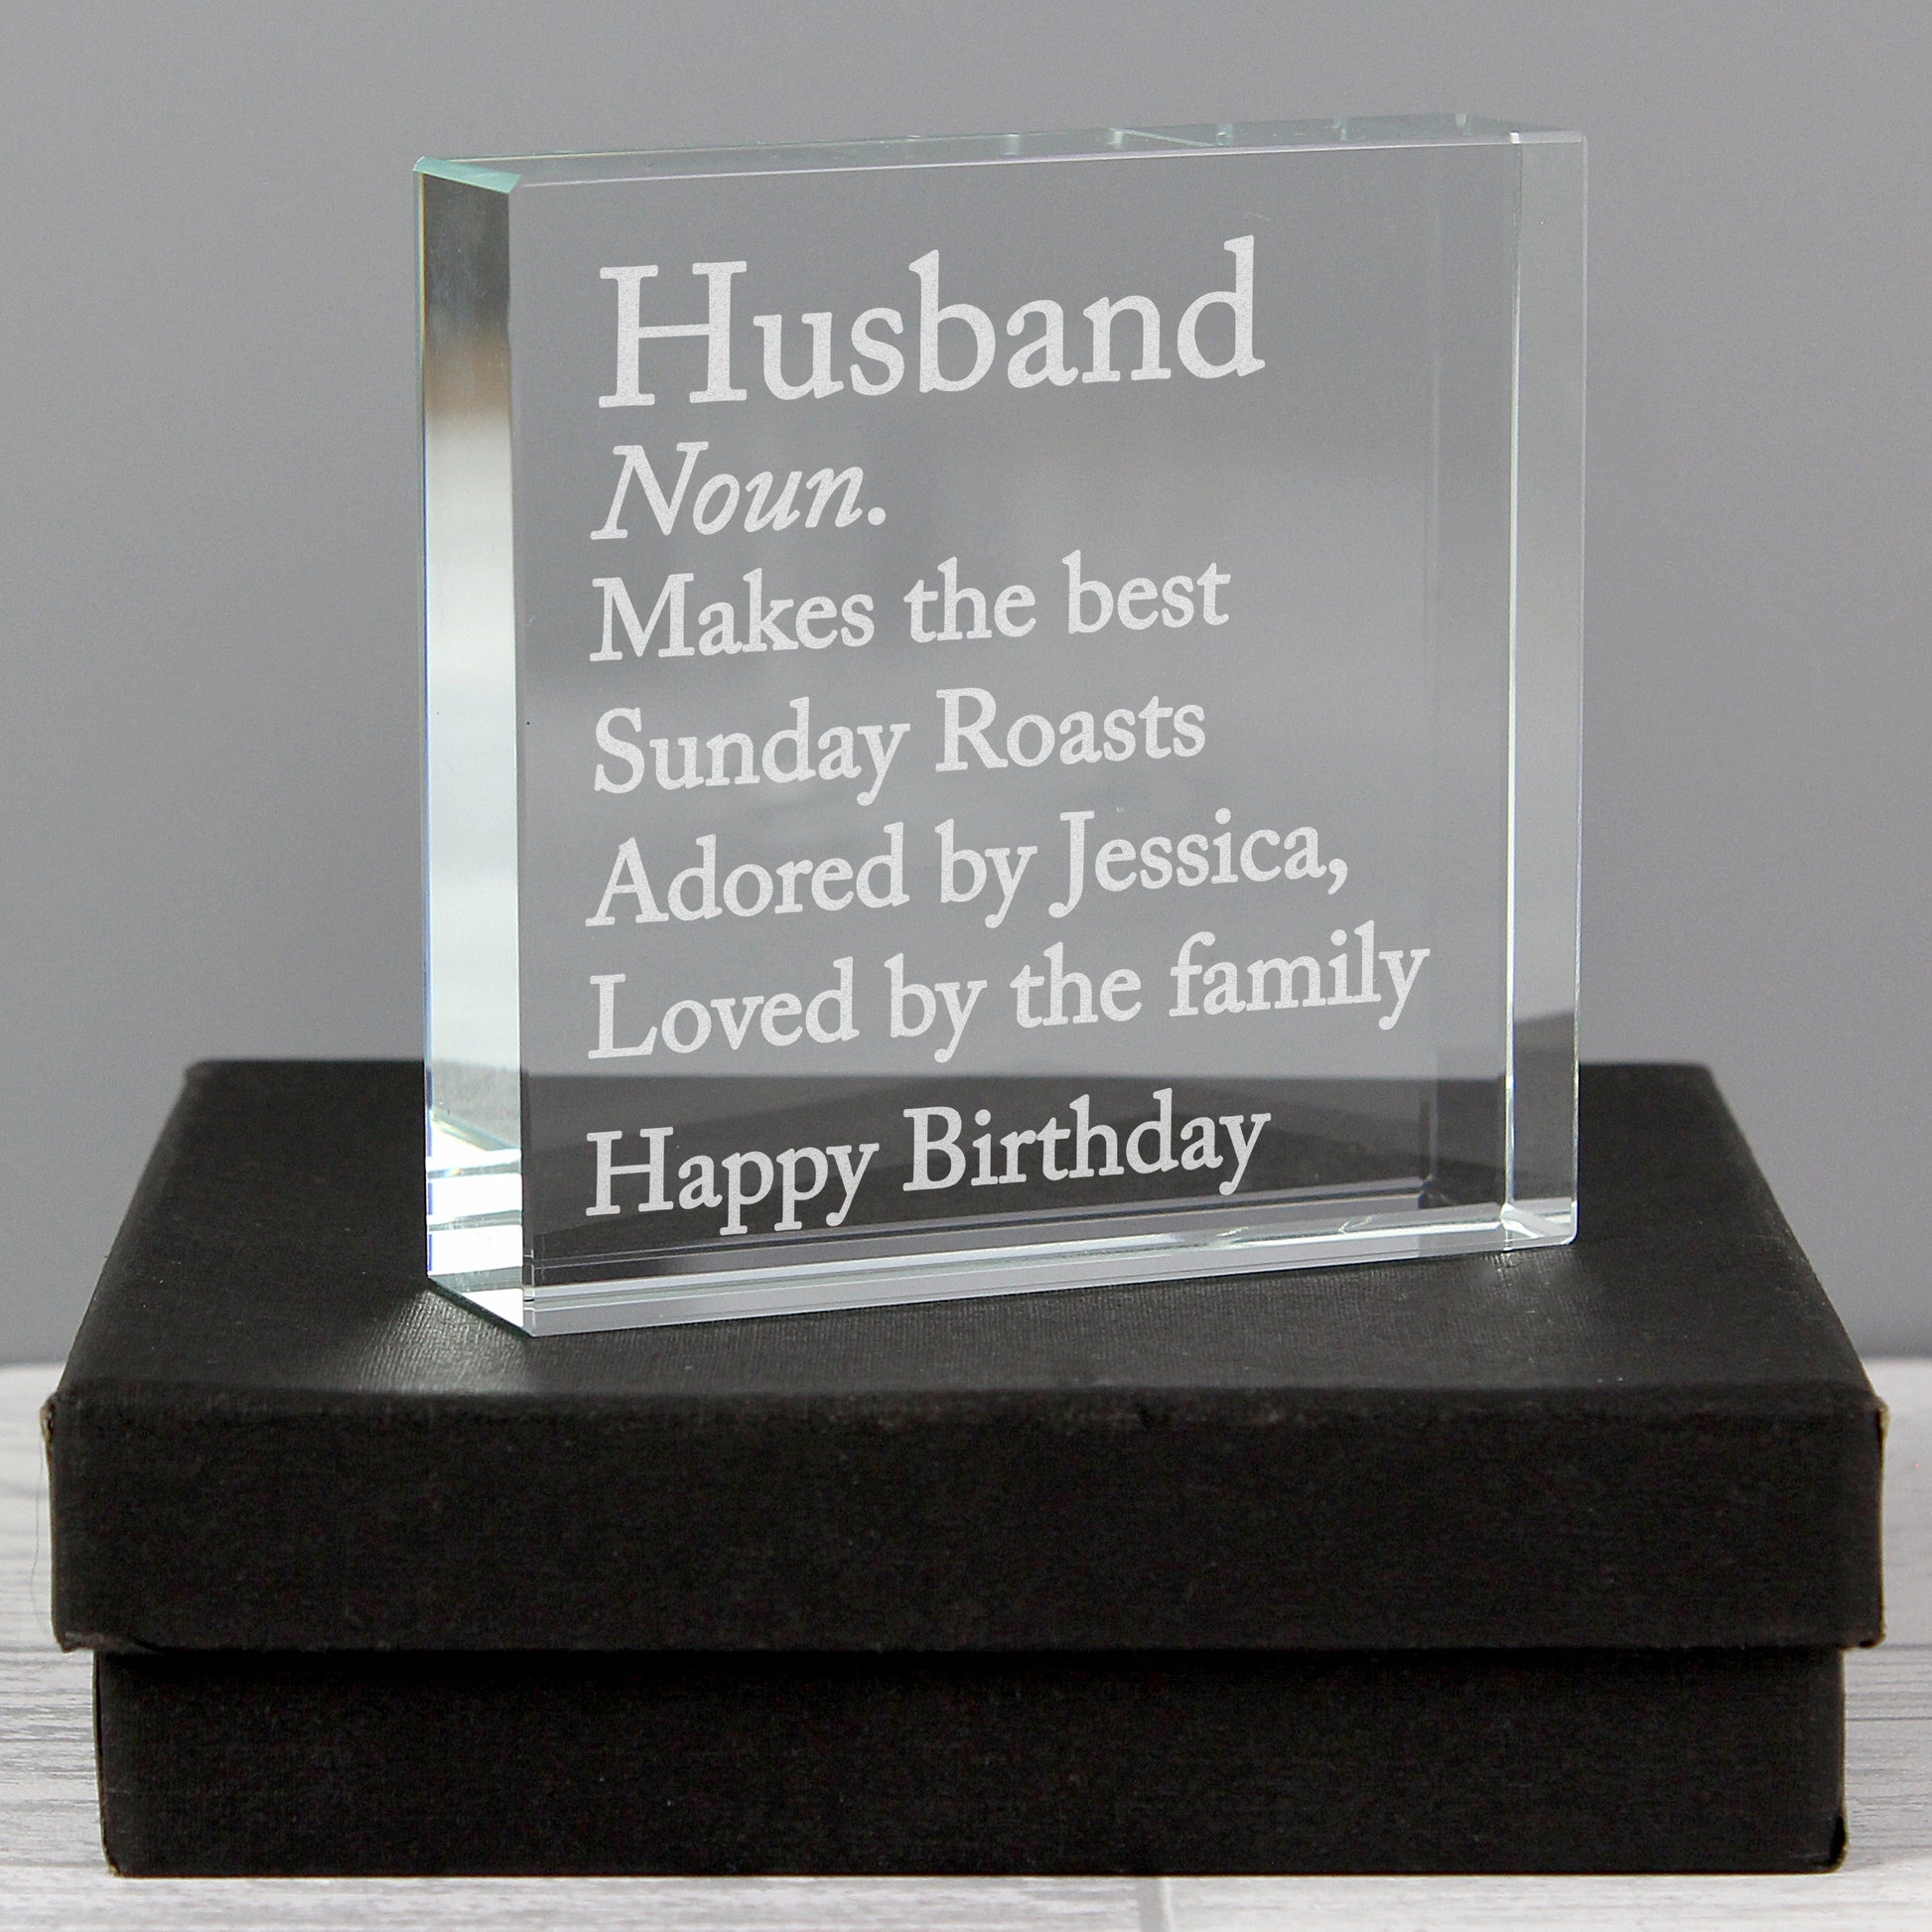 Personalised Dictionary Definition Crystal - Violet Belle Gifts - Personalised Token For Dad